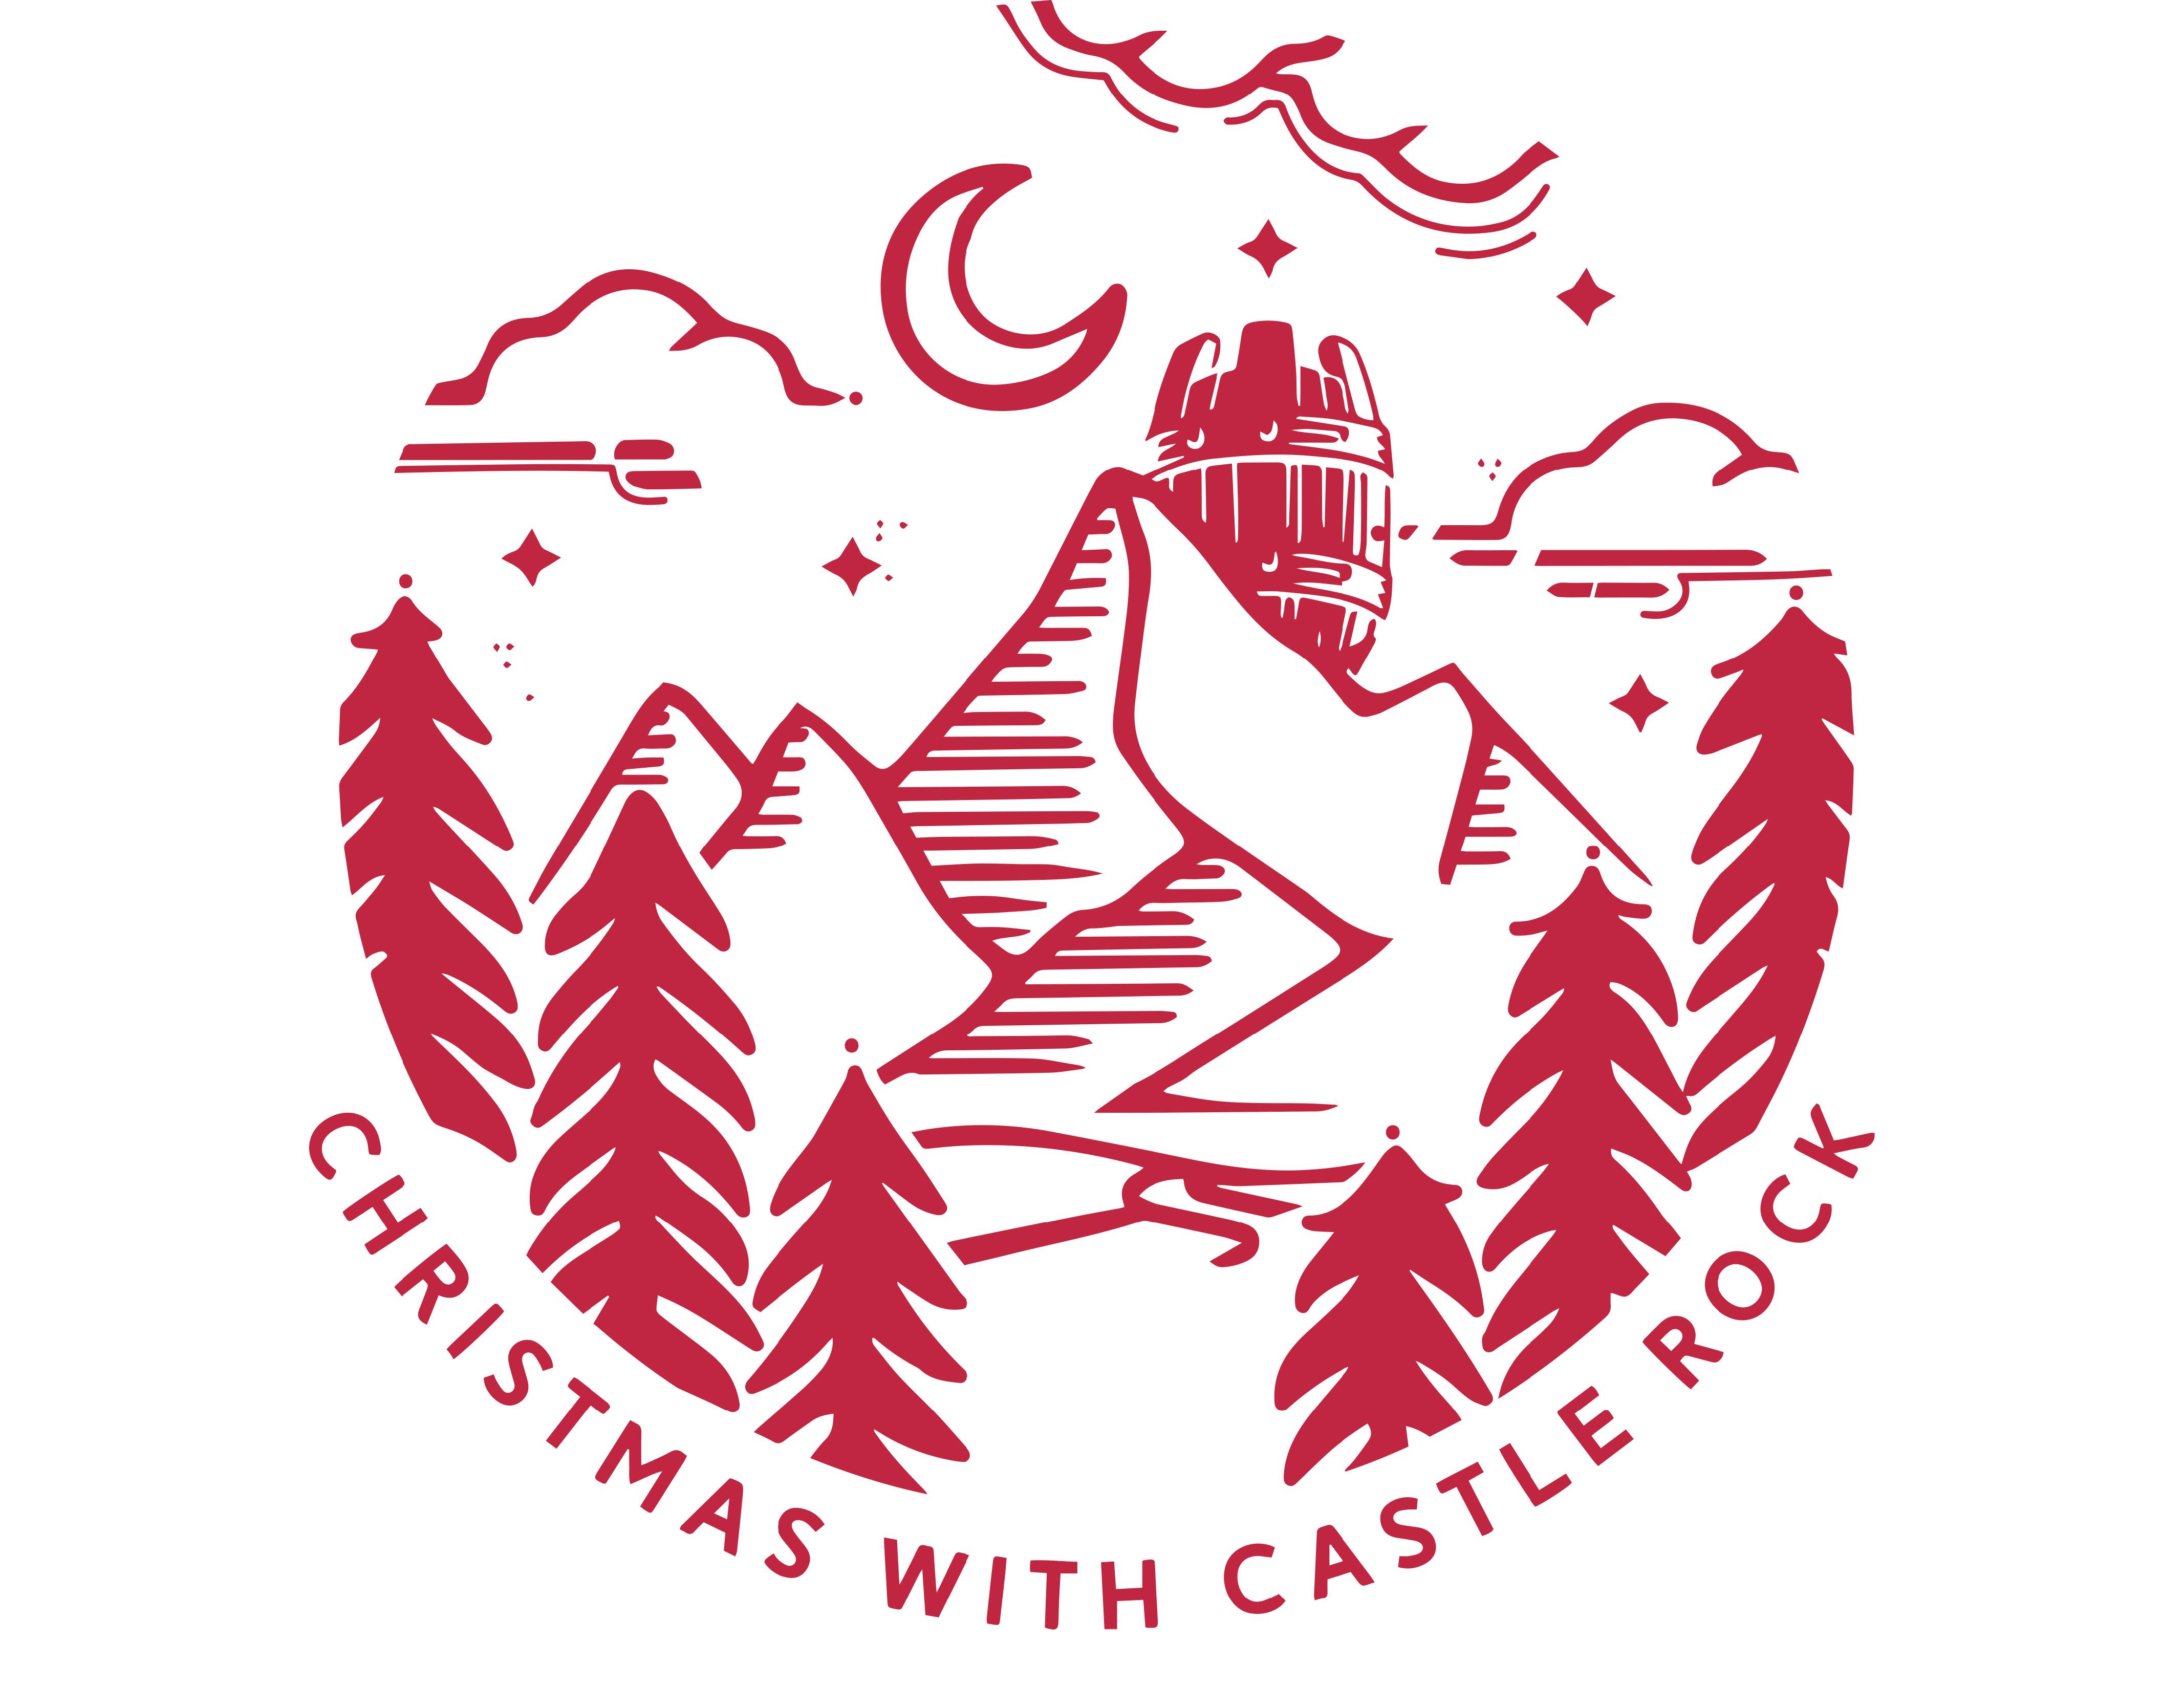 Web Red Logo - Christmas 2018 Logo for web - Castle Rock Brewery